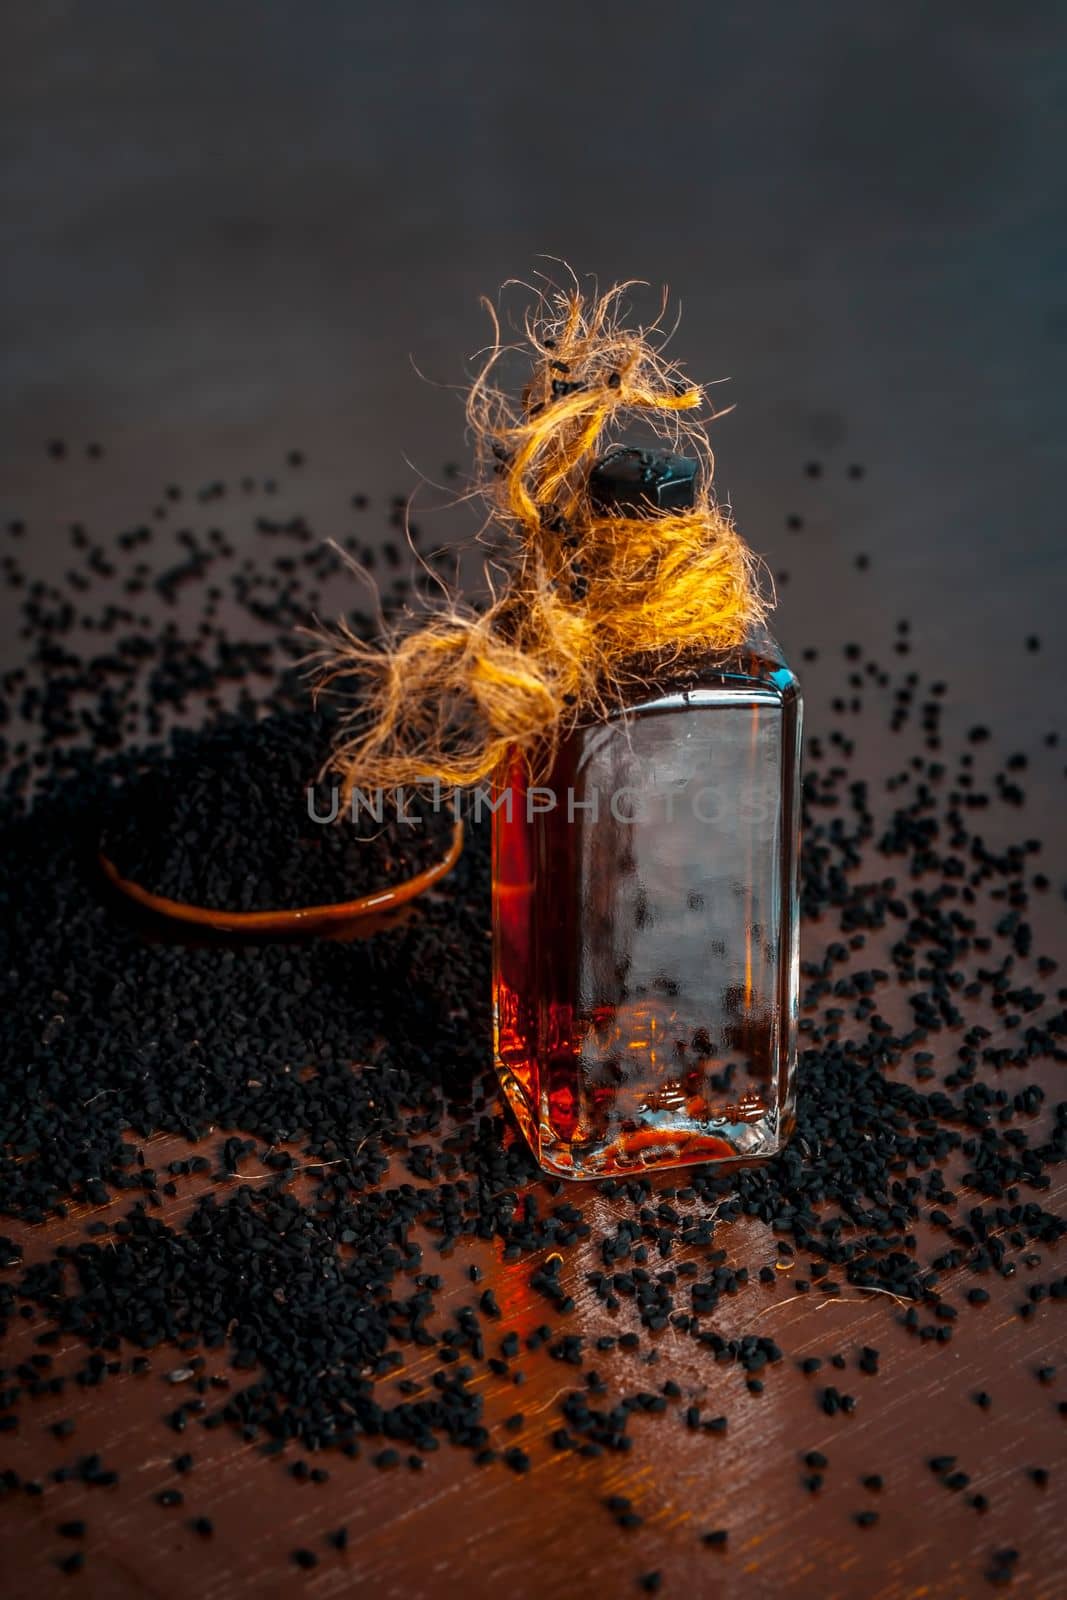 AYURVEDIC HERB i.e. Kalonji,black caraway seeds with its beneficial and essential oil on a brown surface in dark Gothic colors.This oil is used in weight loss,lowing the blood sugar/diabetes etc. by mirzamlk